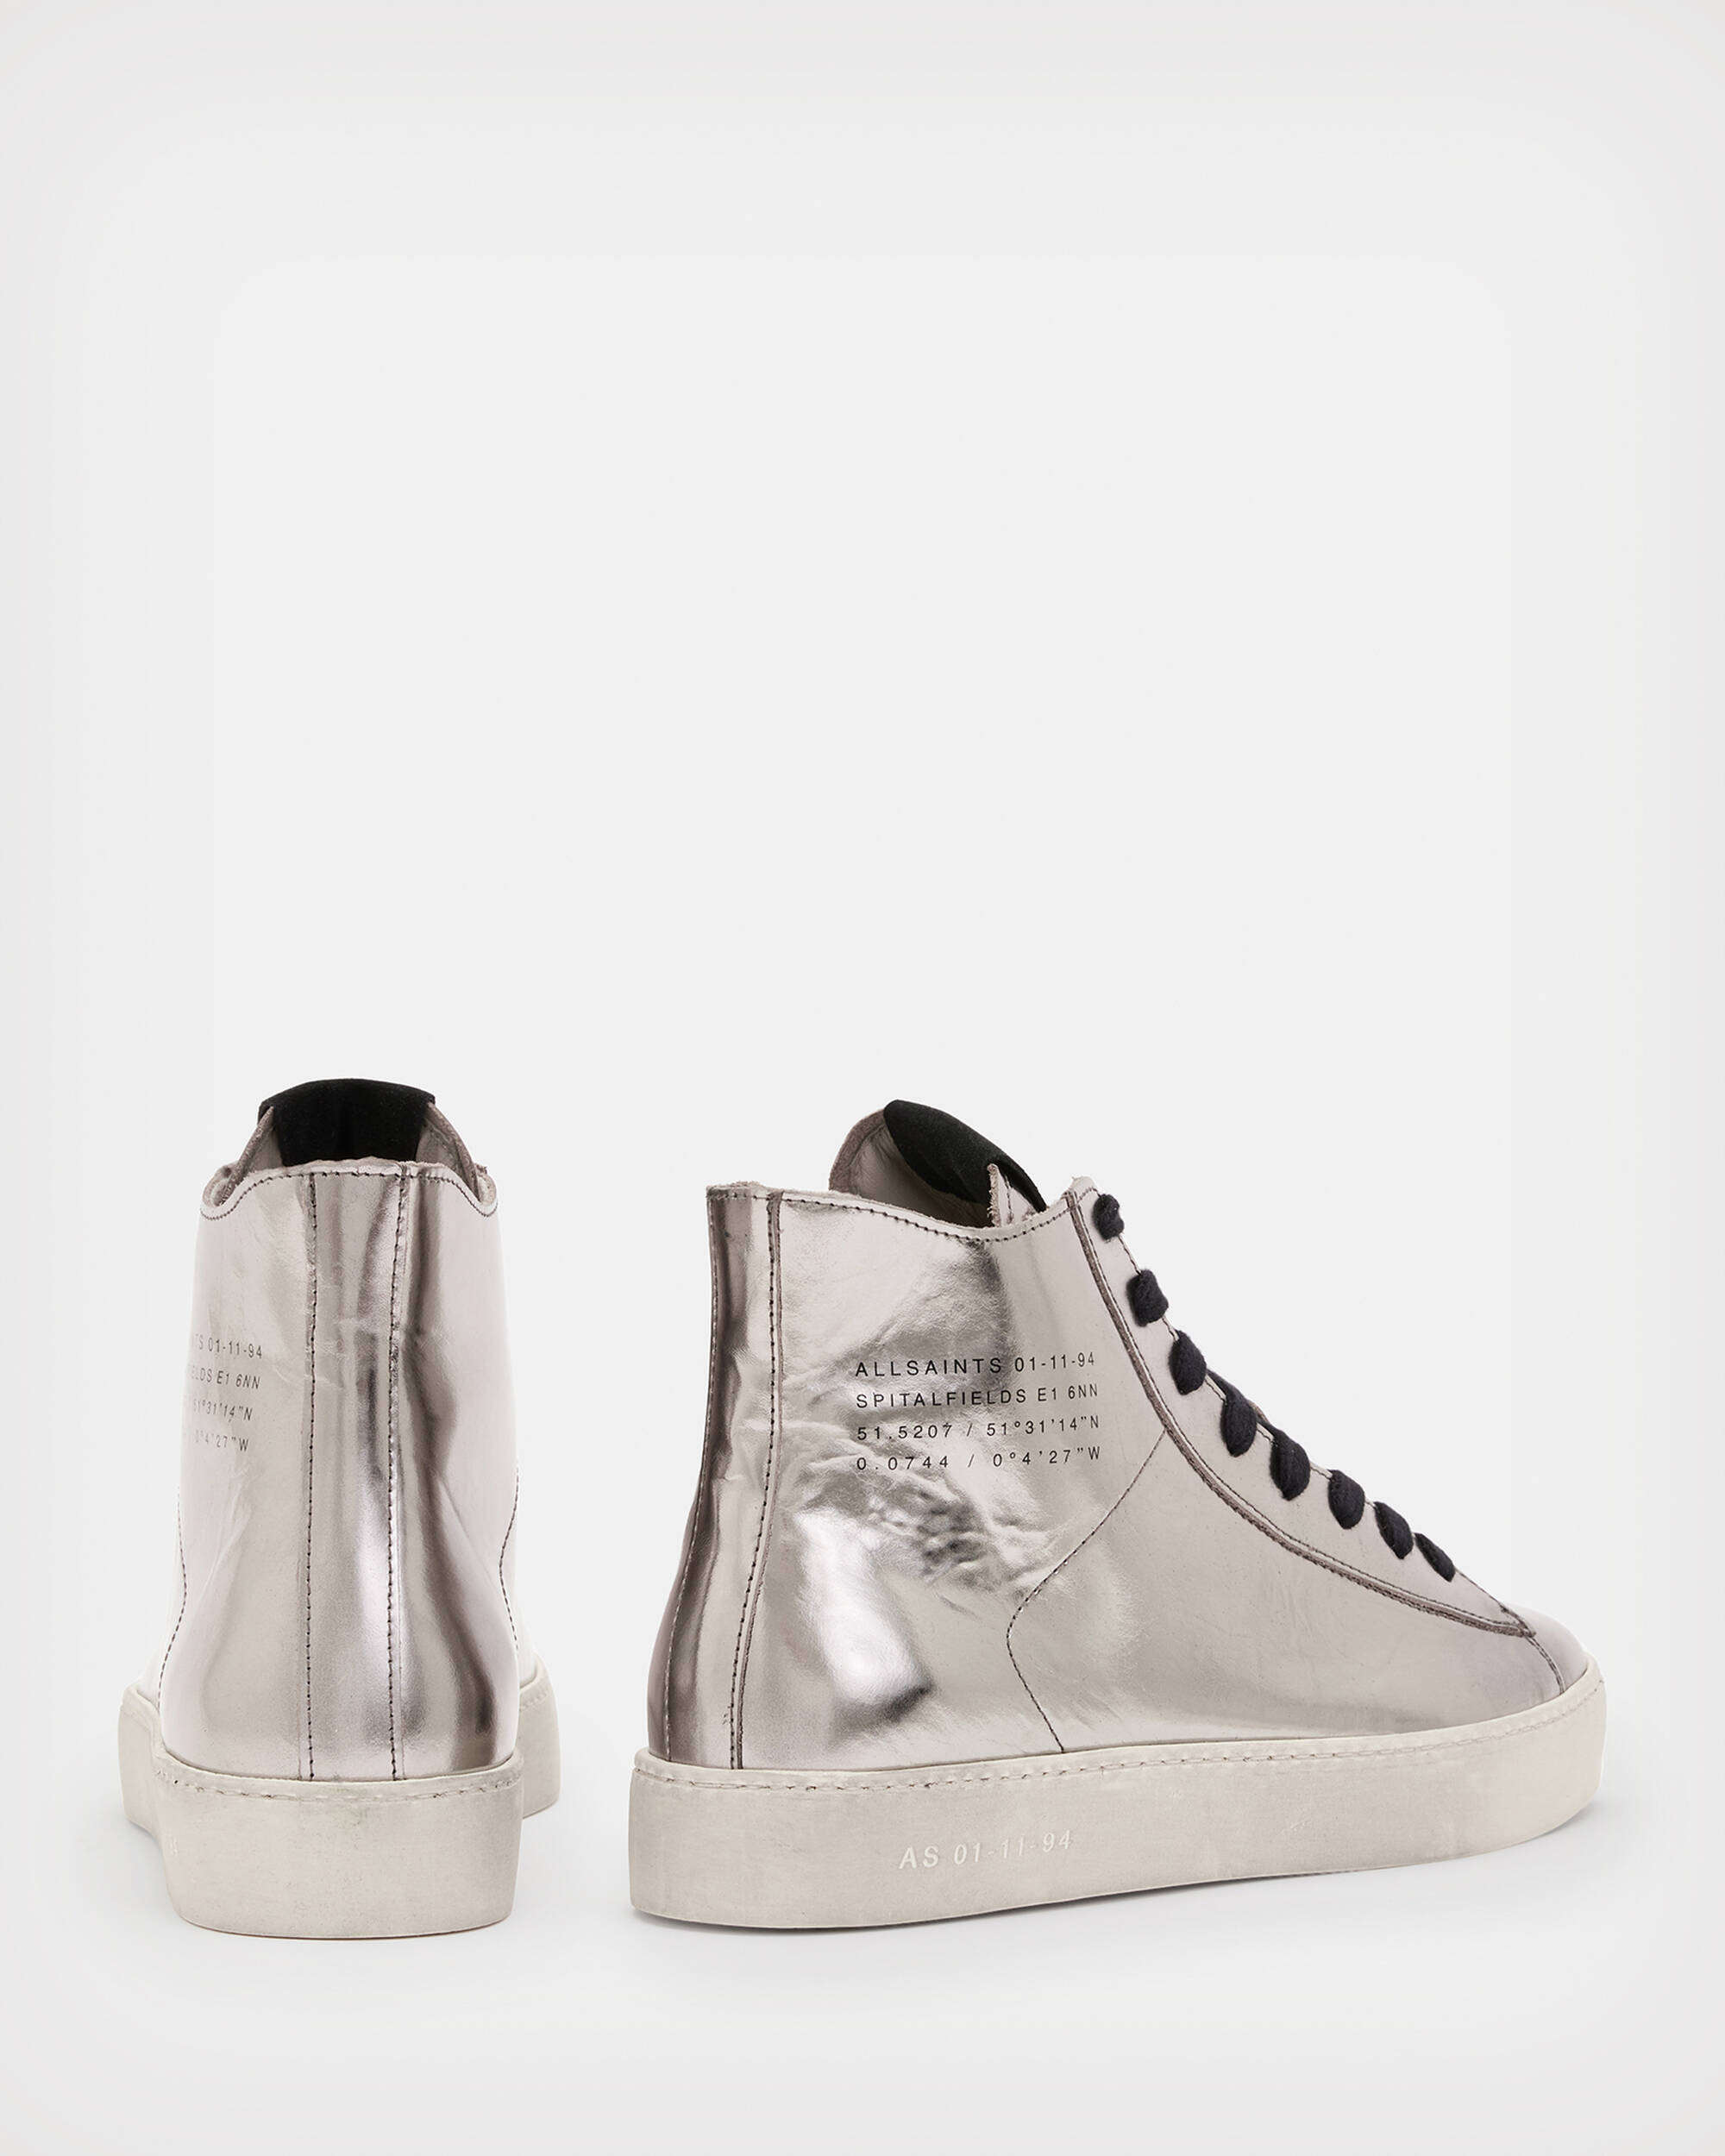 Tana Metallic Leather High Top Sneakers  large image number 6